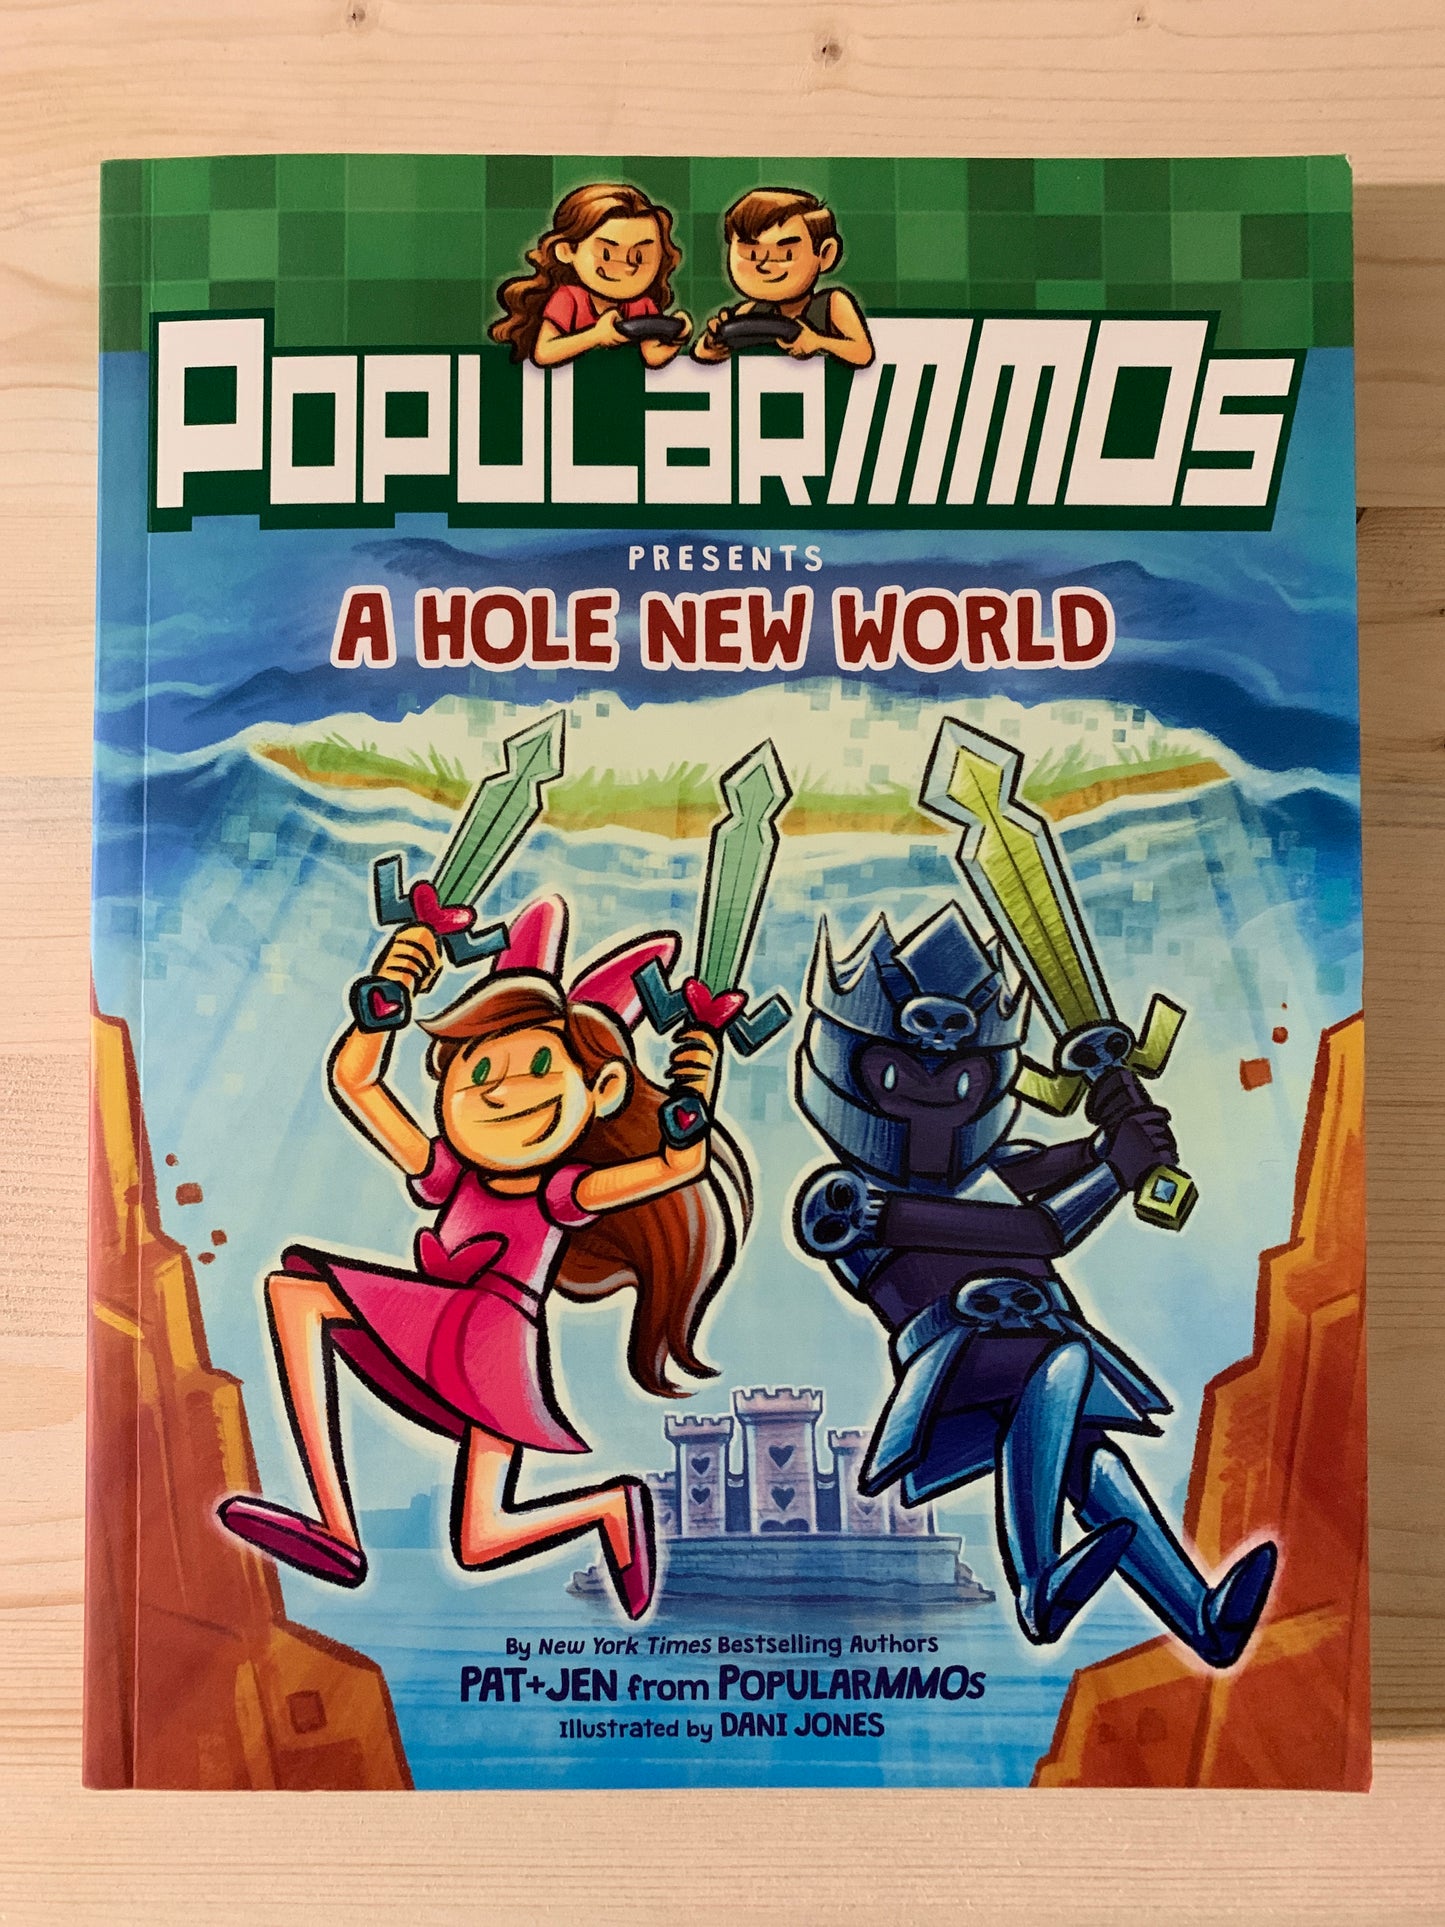 Popular MMOS presents A Hole New World